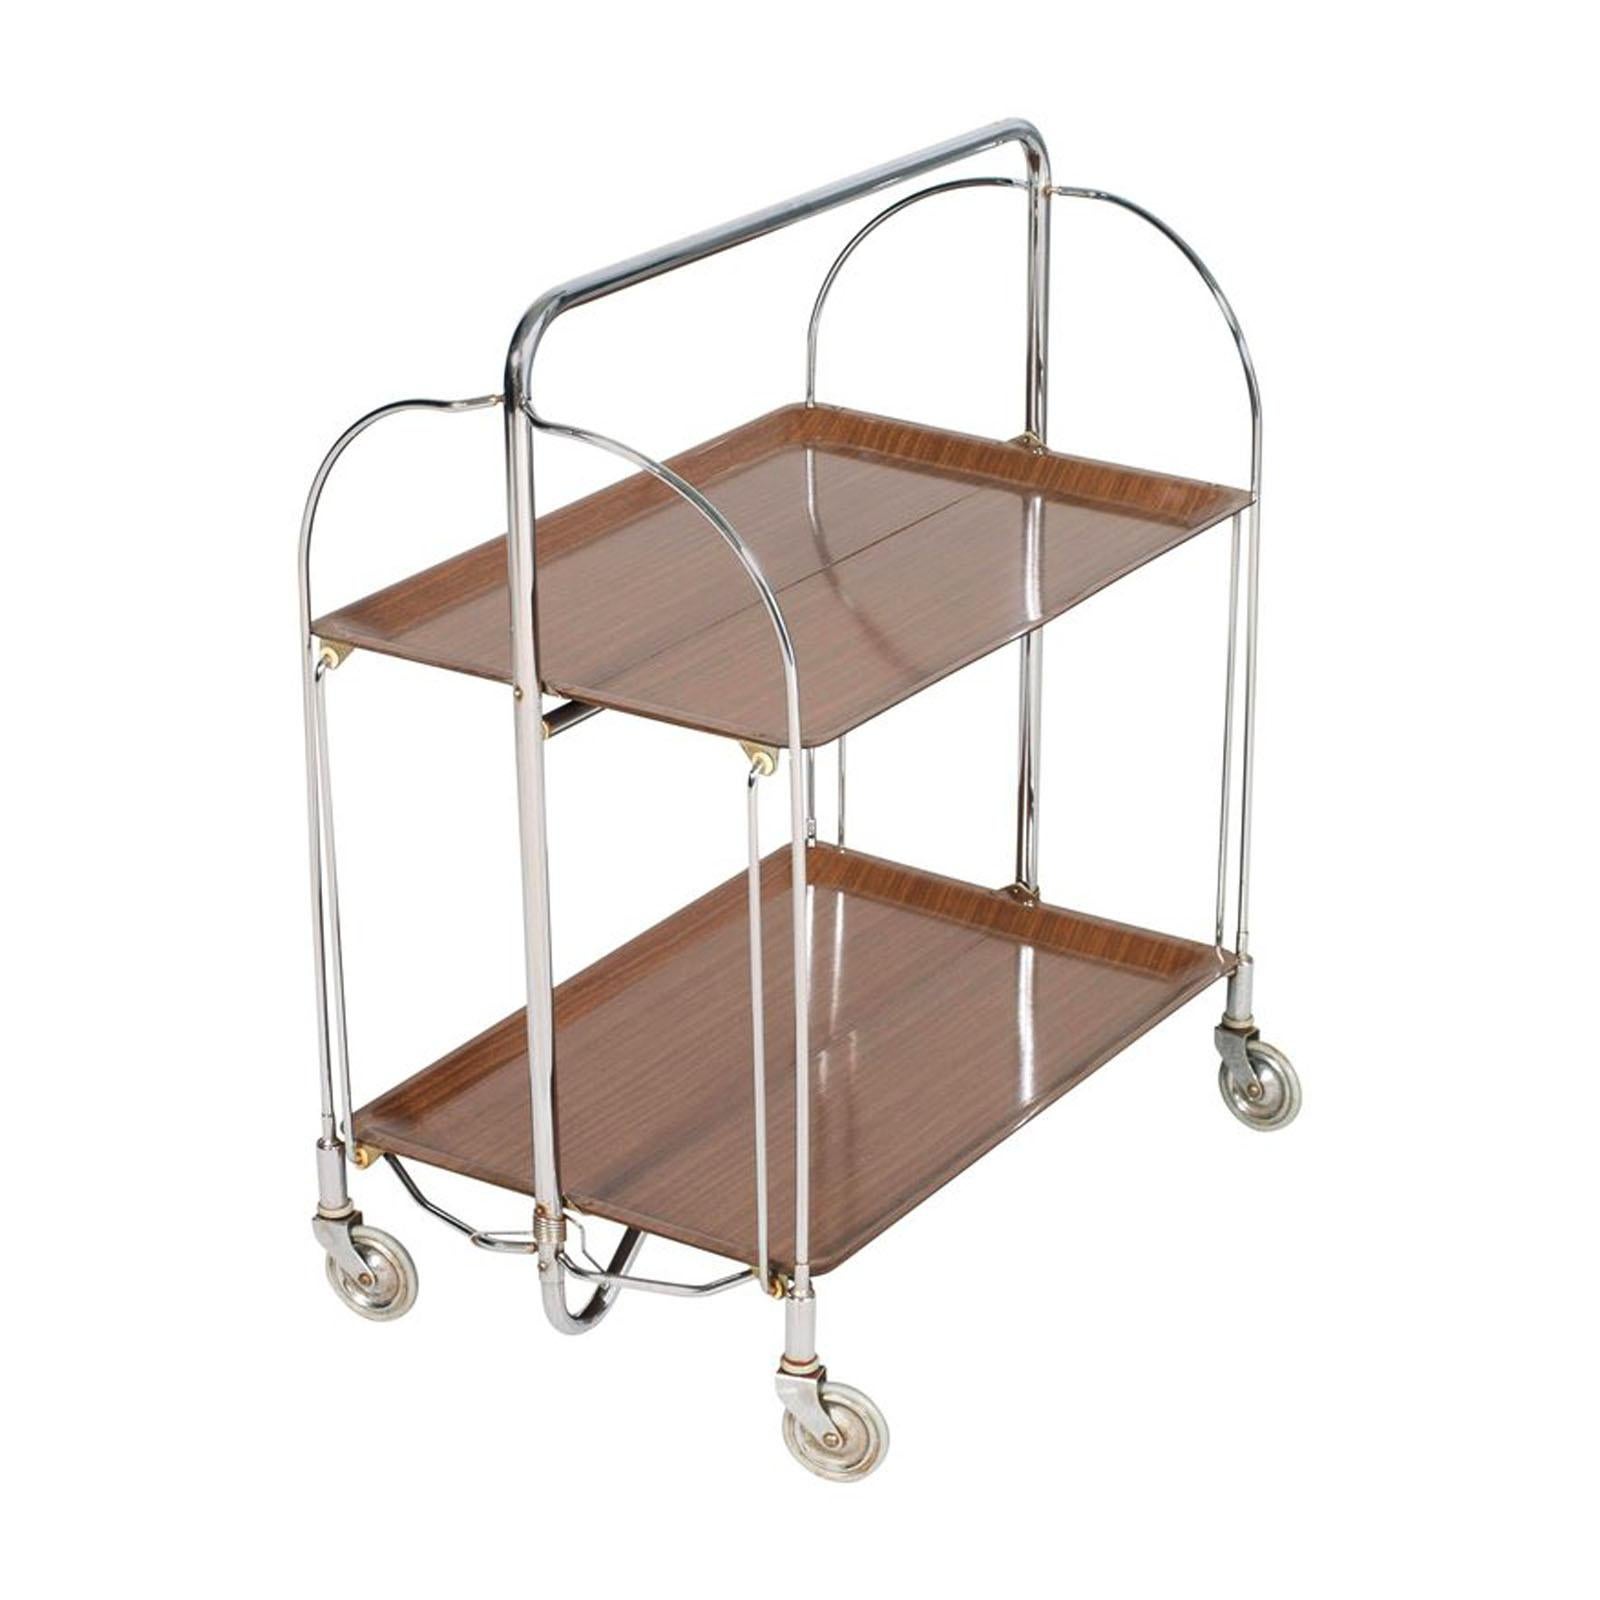 1970s Serving Cart from Germany Formica and Chrome, Clean Multifunctional Design